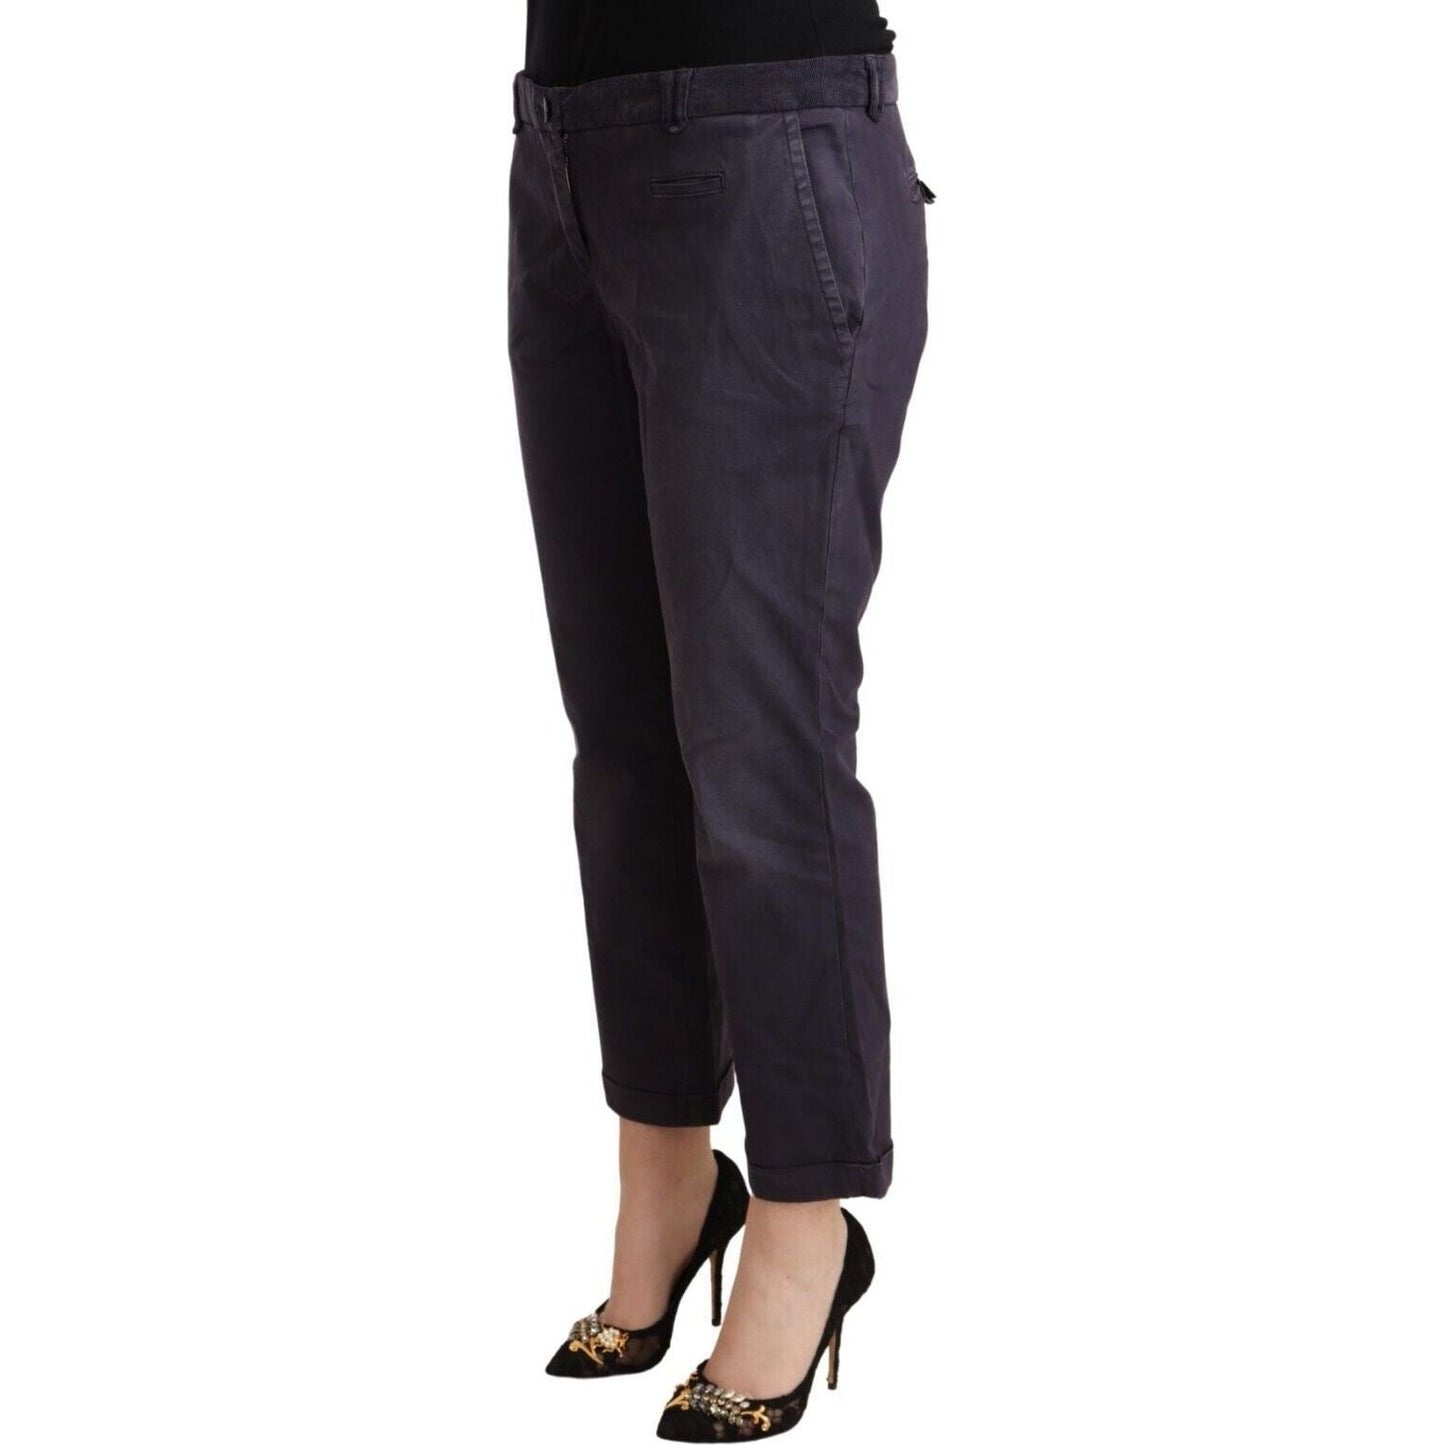 JuccaChic Low Waist Cropped Pants in BlackMcRichard Designer Brands£209.00